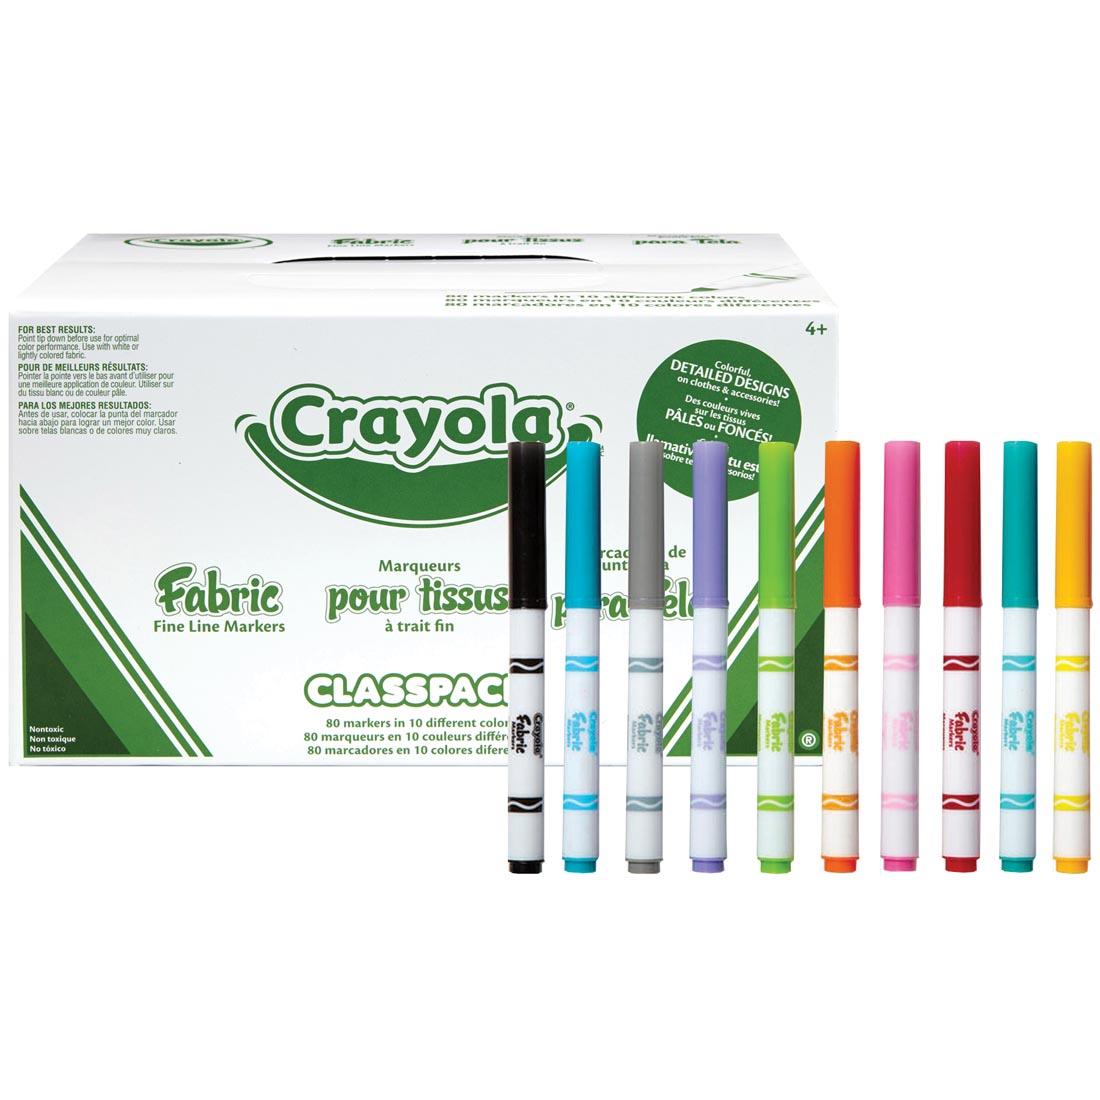 Crayola Fabric Markers 80-Count Classpack Box and 10 Colors of Markers